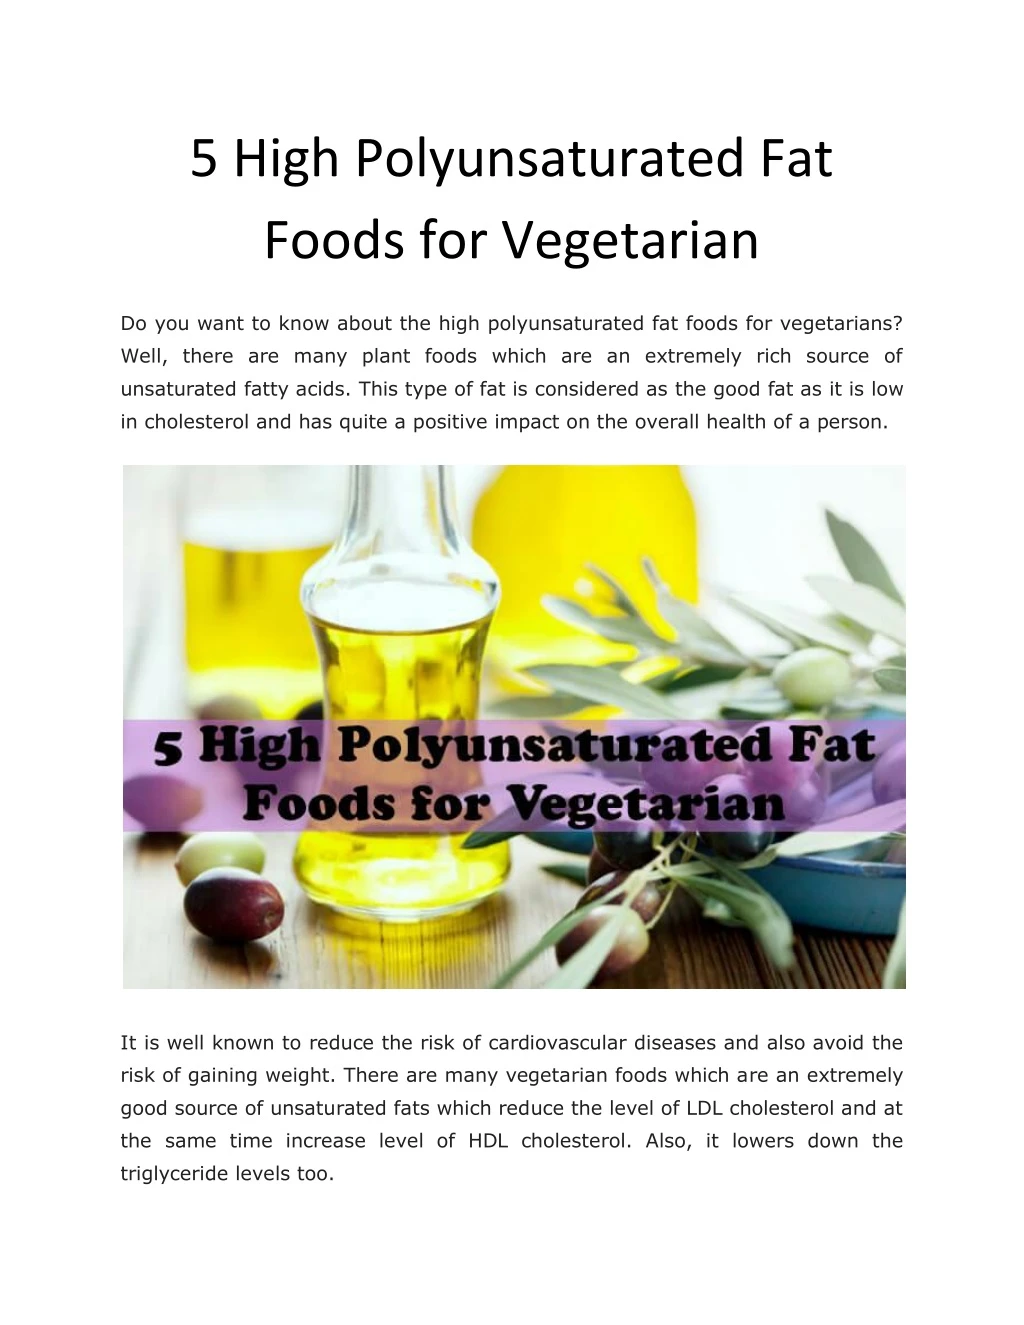 5 high polyunsaturated fat foods for vegetarian